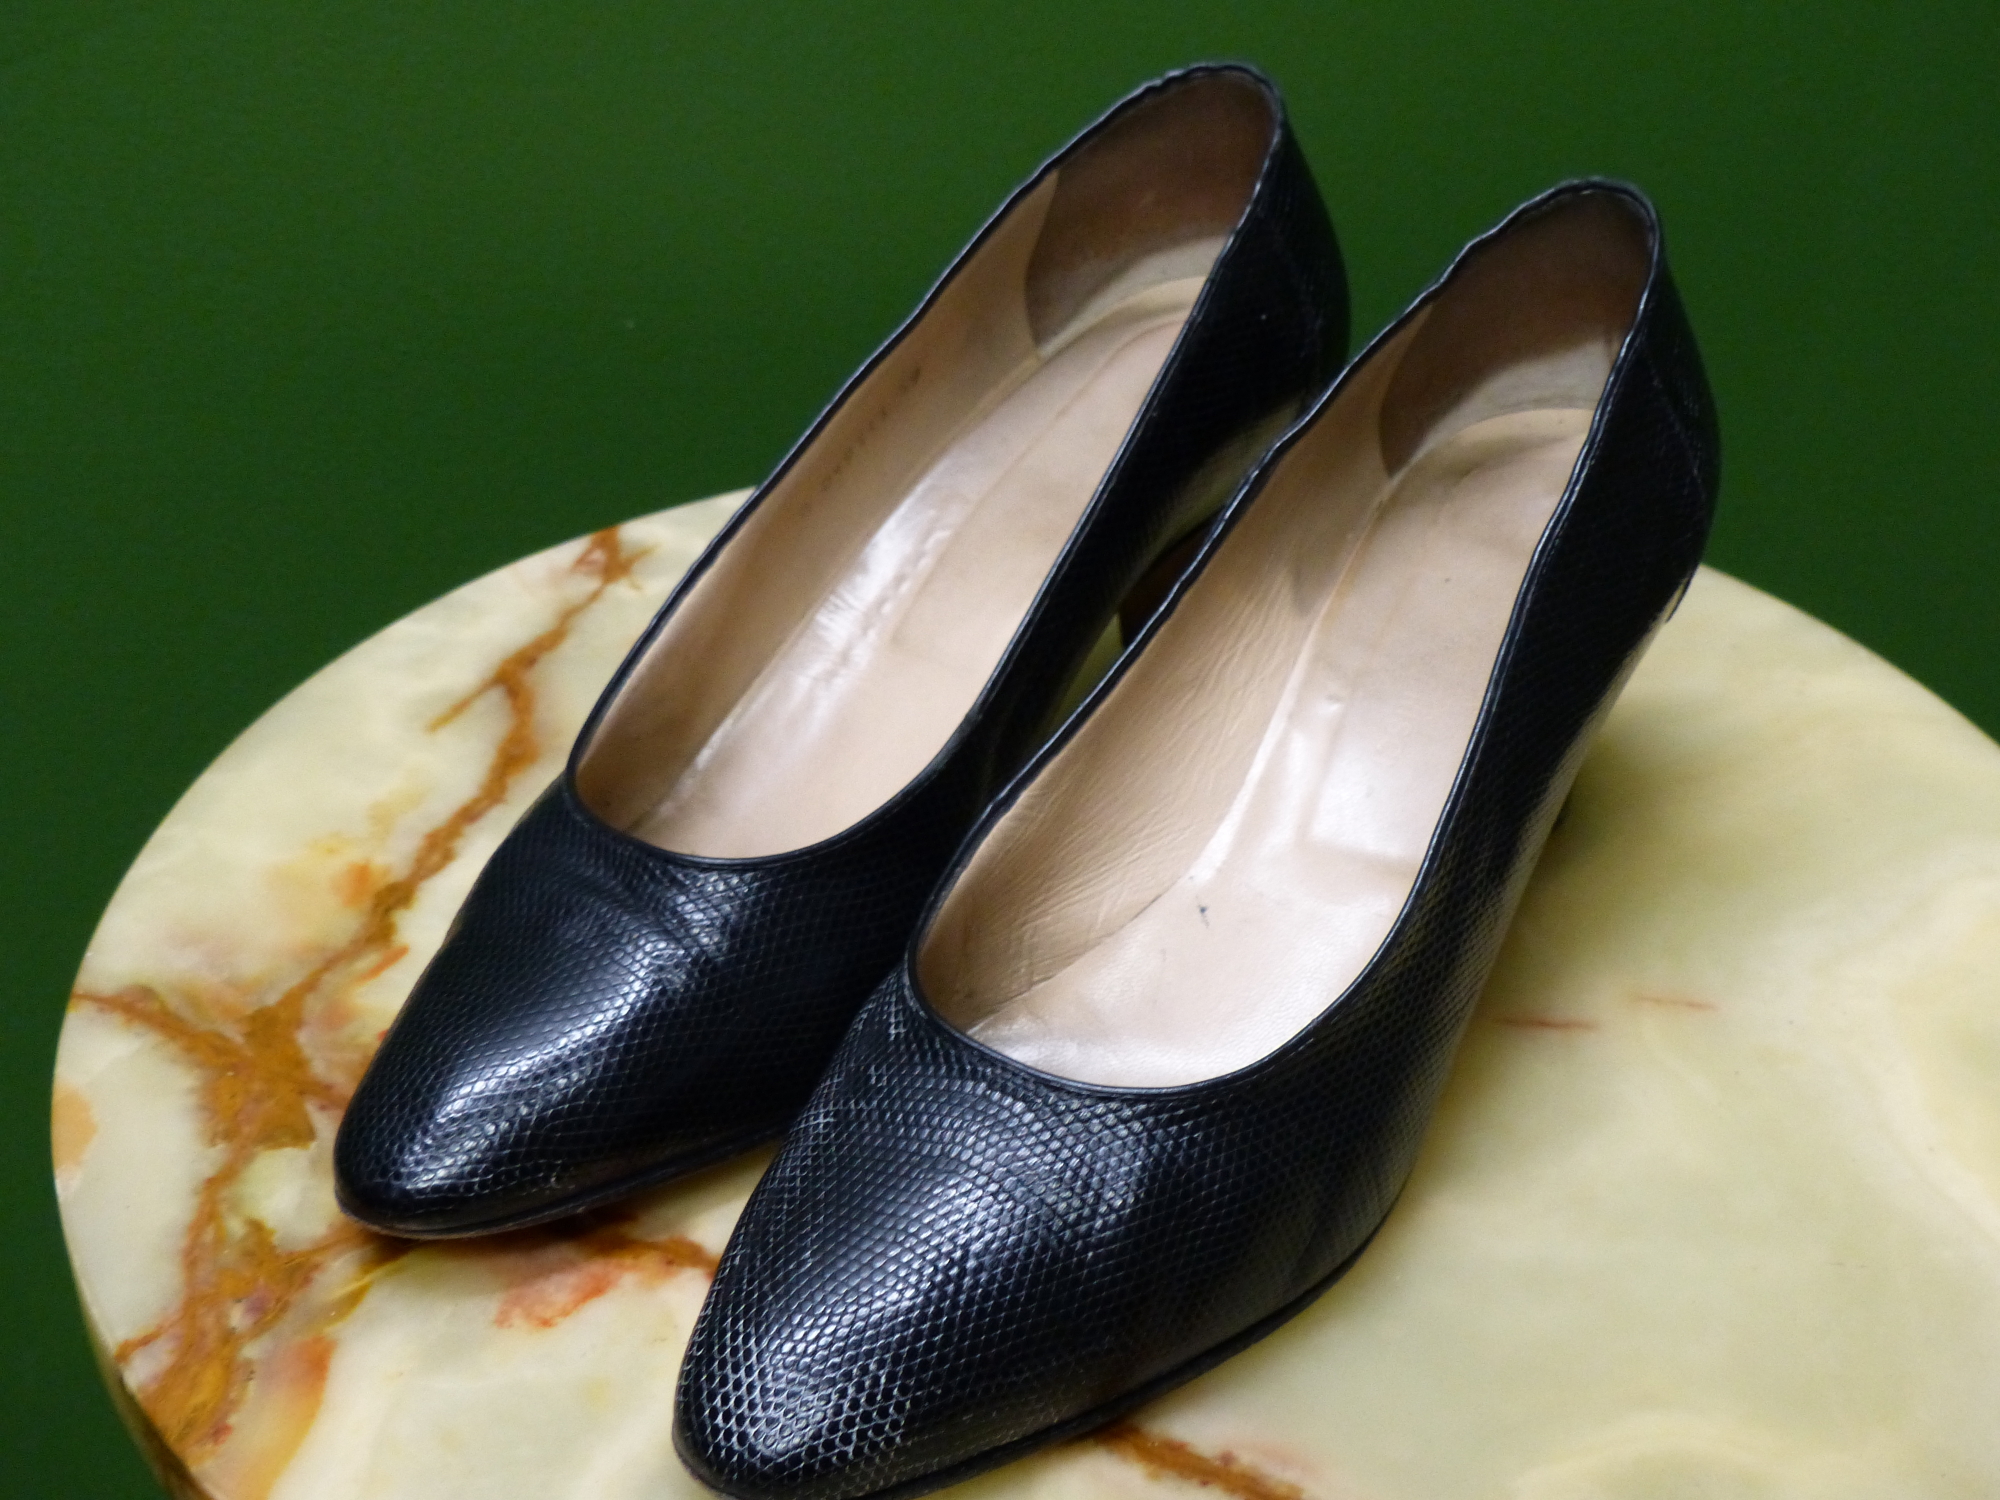 SHOES. TWO PAIRS TANINO CRISCI BLACK HEALS EUR SIZE 39. BLACK LOAFERS EUR SIZE 39. - Image 7 of 11